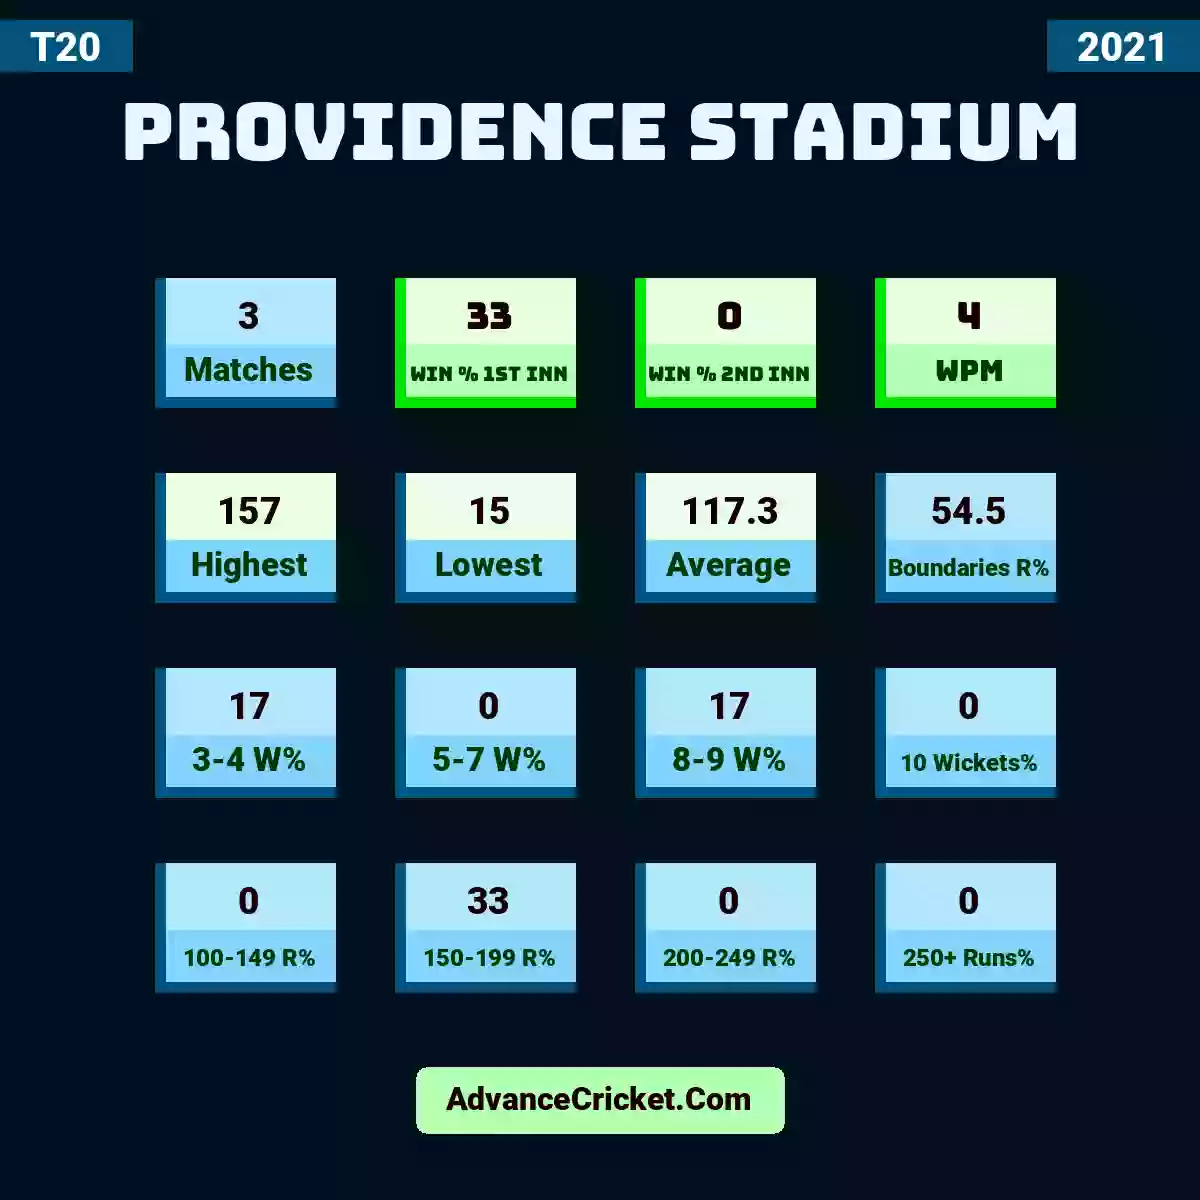 Image showing Providence Stadium with Matches: 3, Win % 1st Inn: 33, Win % 2nd Inn: 0, WPM: 4, Highest: 157, Lowest: 15, Average: 117.3, Boundaries R%: 54.5, 3-4 W%: 17, 5-7 W%: 0, 8-9 W%: 17, 10 Wickets%: 0, 100-149 R%: 0, 150-199 R%: 33, 200-249 R%: 0, 250+ Runs%: 0.